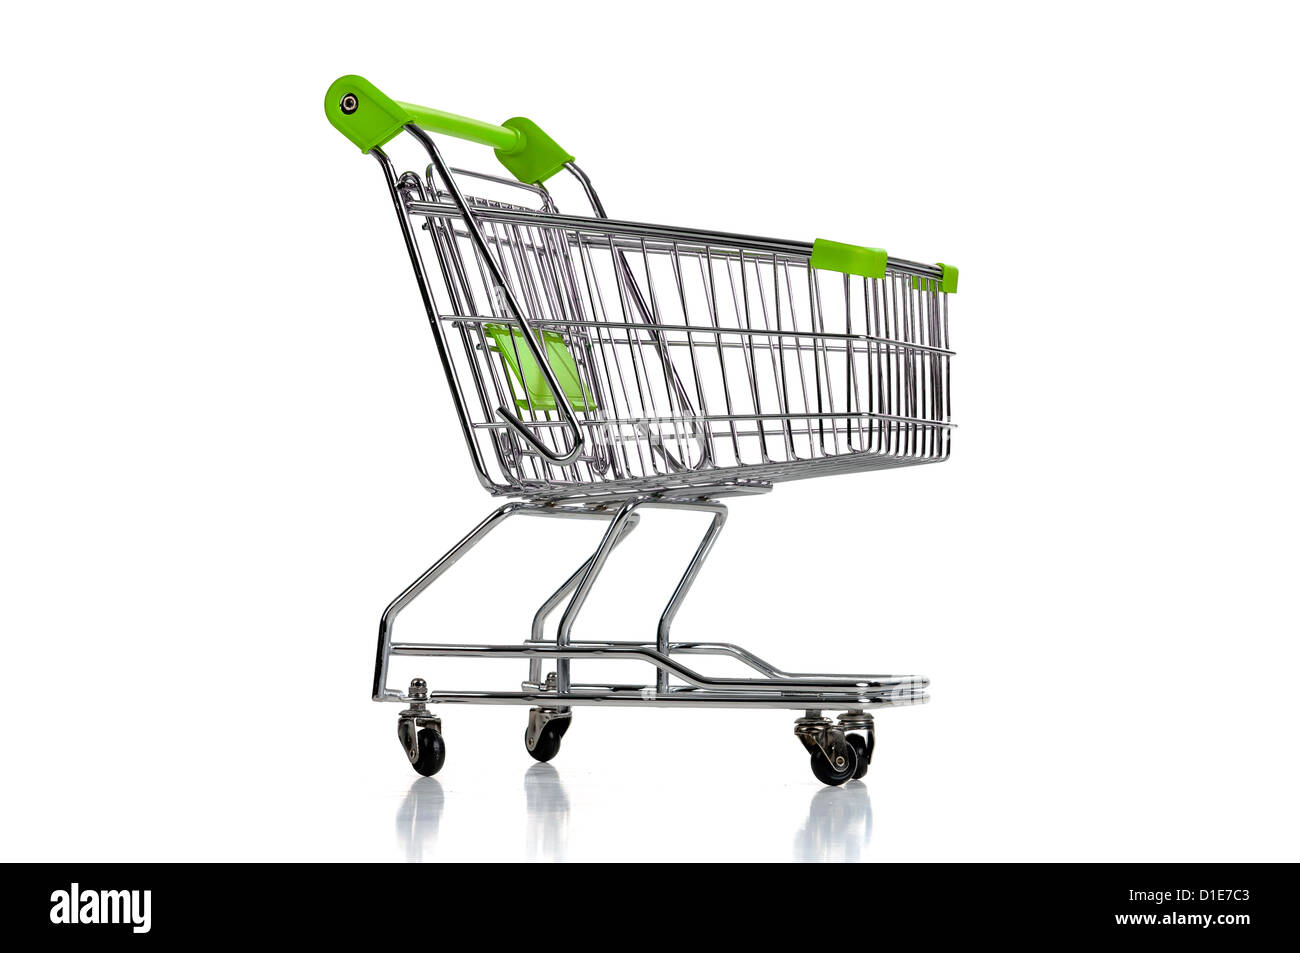 Green shopping cart isolated in white Stock Photo